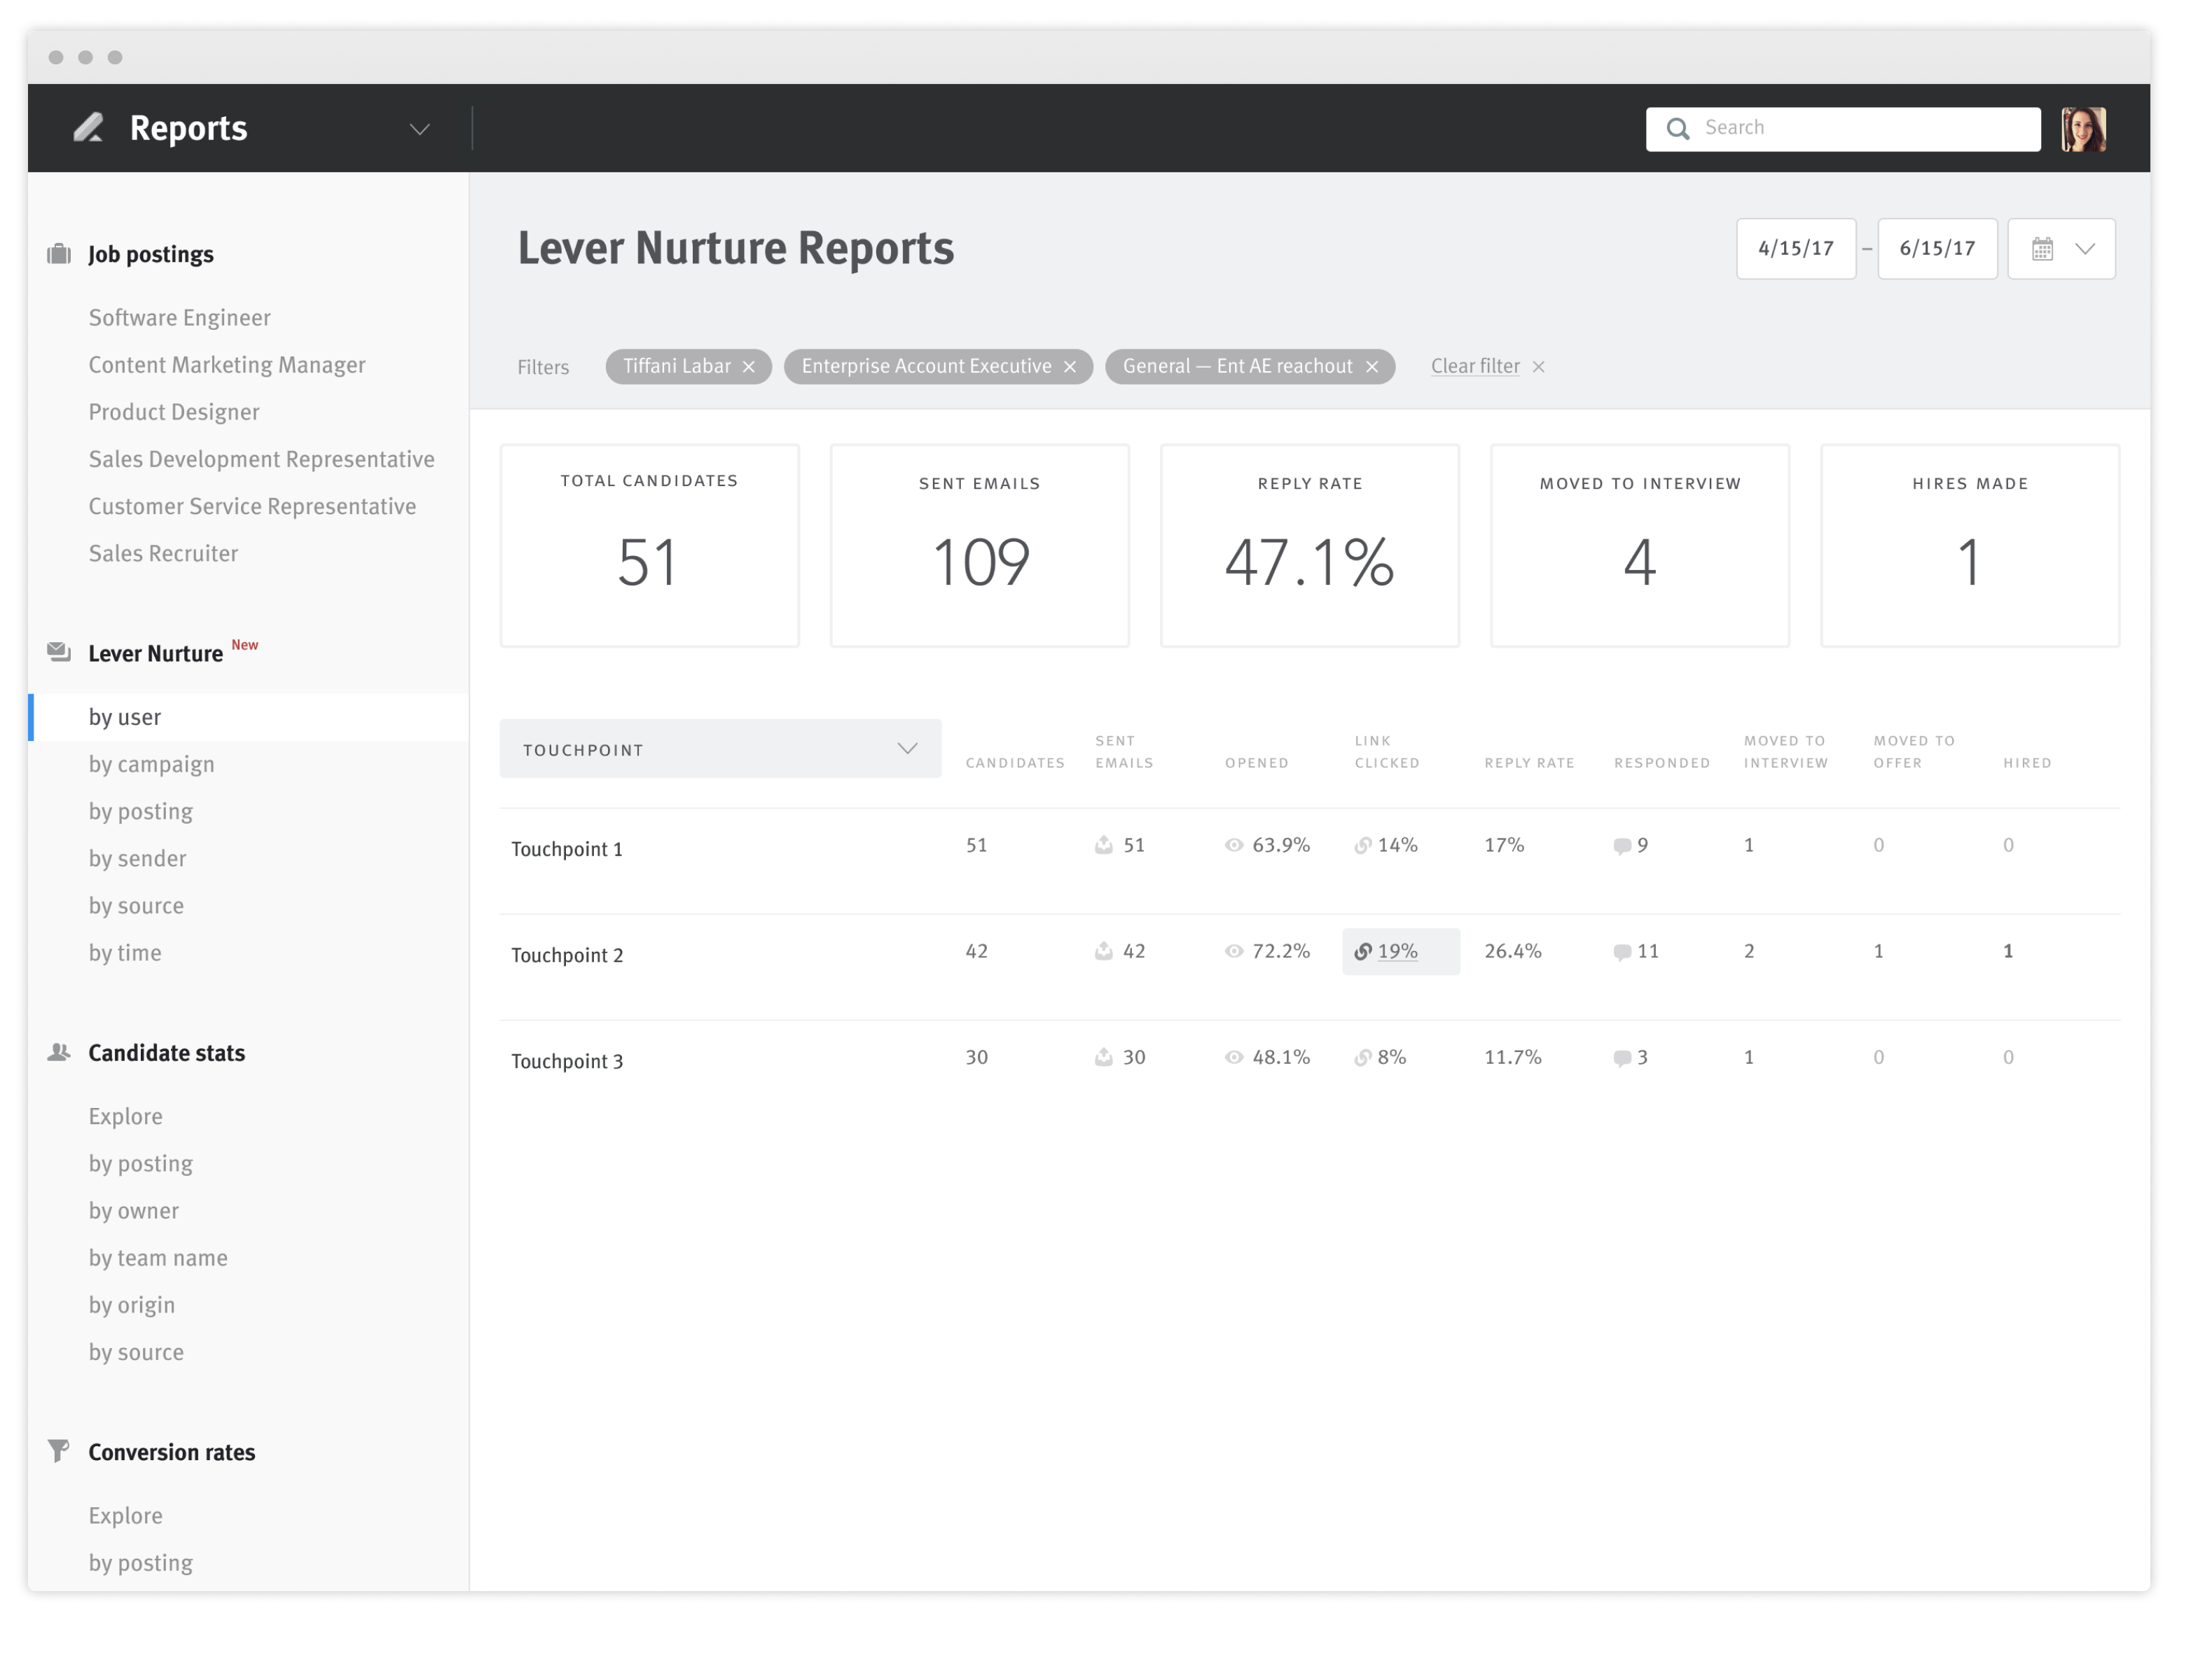 Nuture by user report showing tourchpoint performance for each touchpoint in the selected Nurture campaign